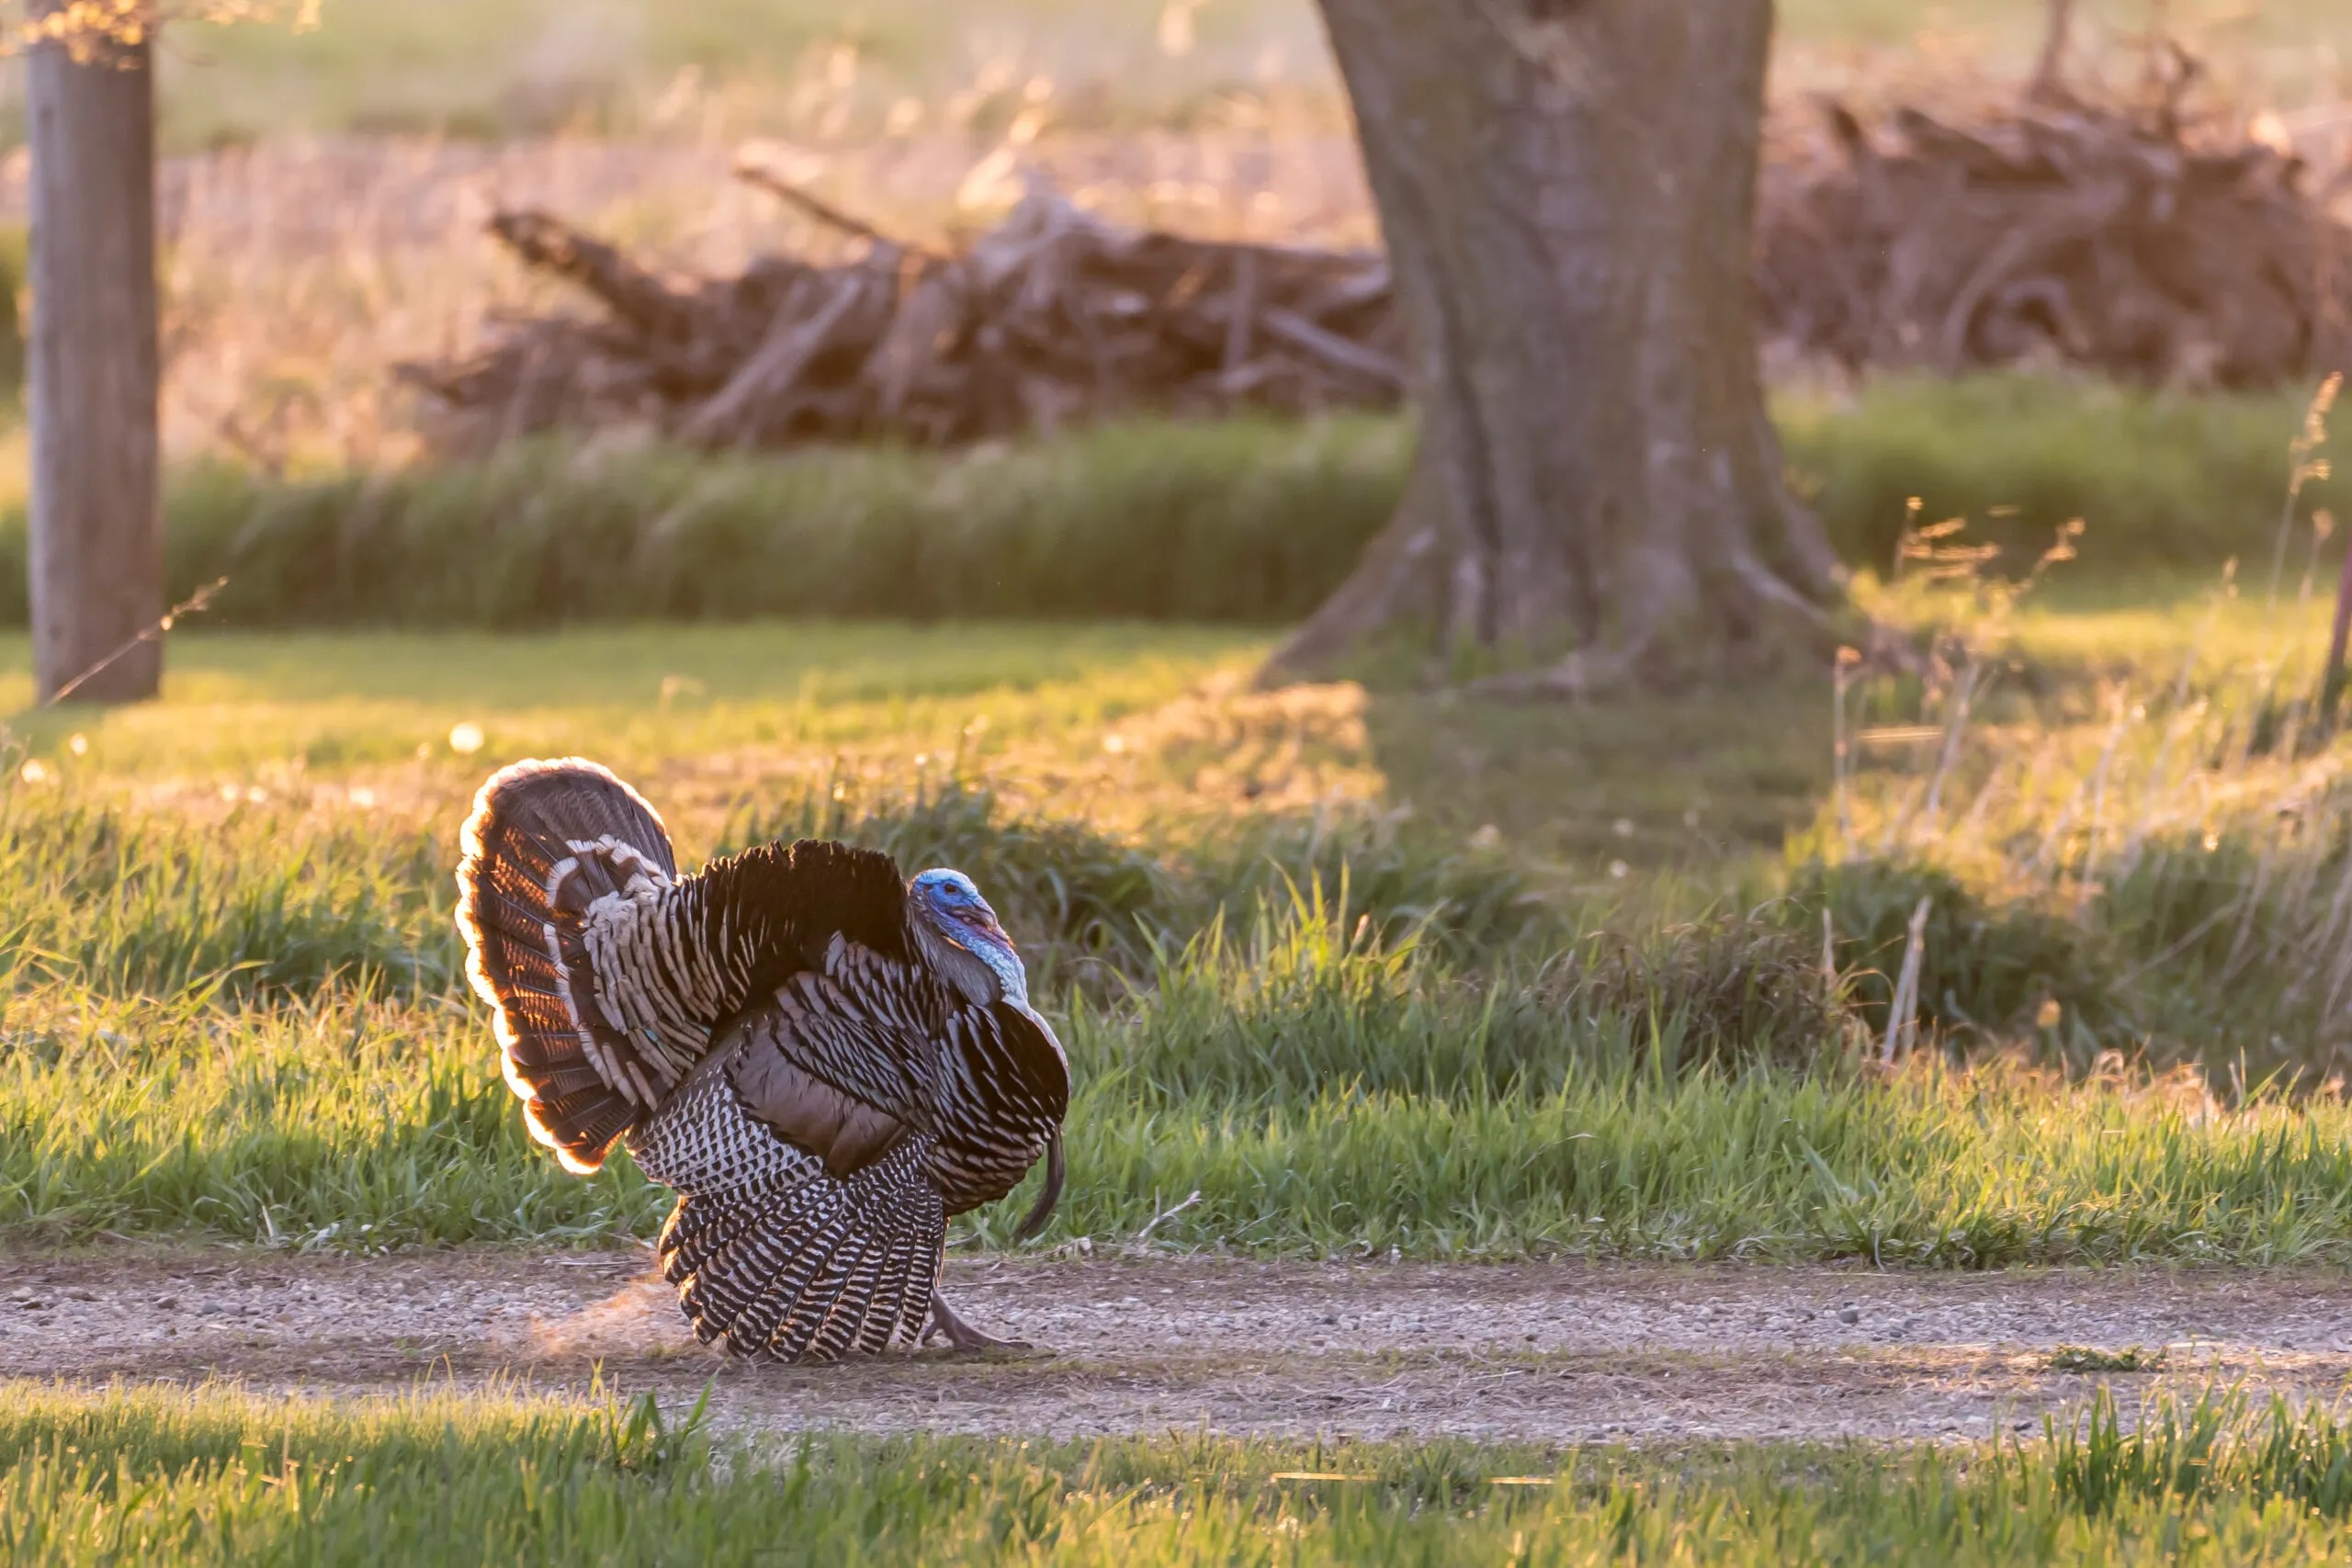 Turkey Hunting Tips from the Pros